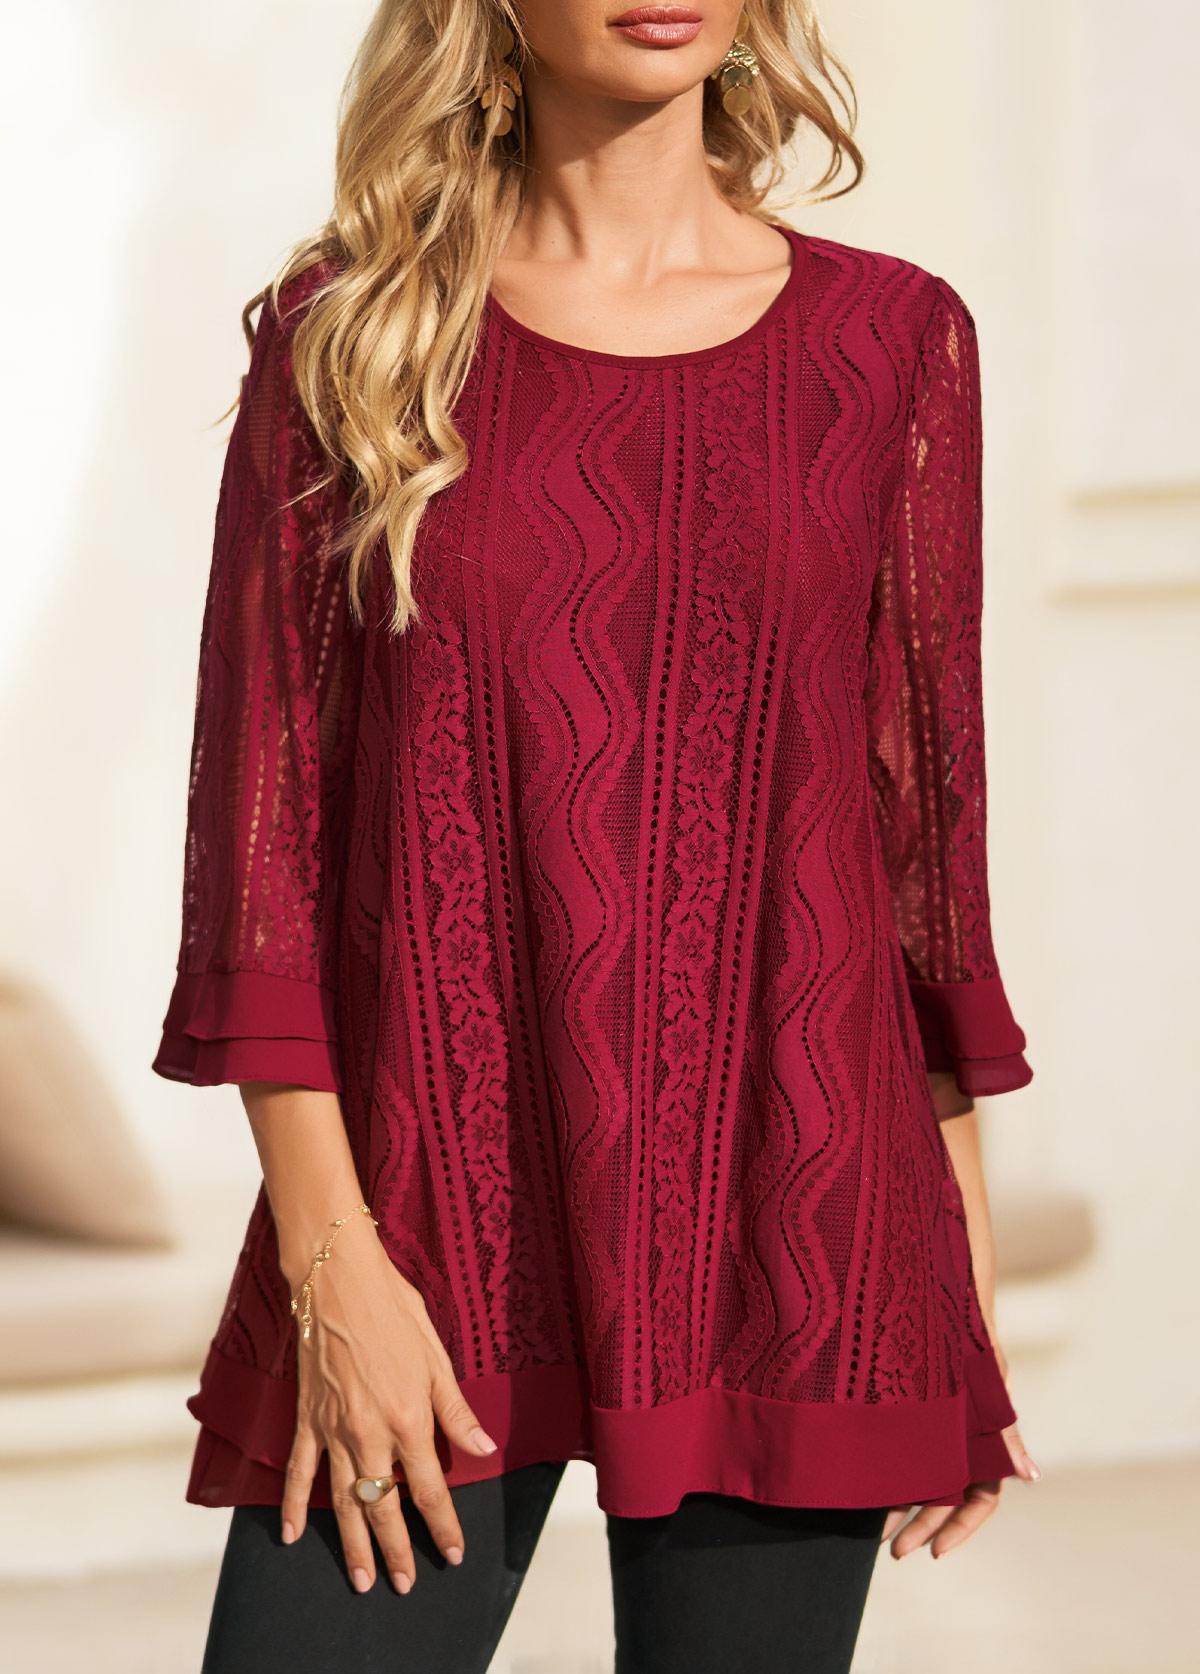 Lace Stitching 3/4 Sleeve Wine Red Blouse